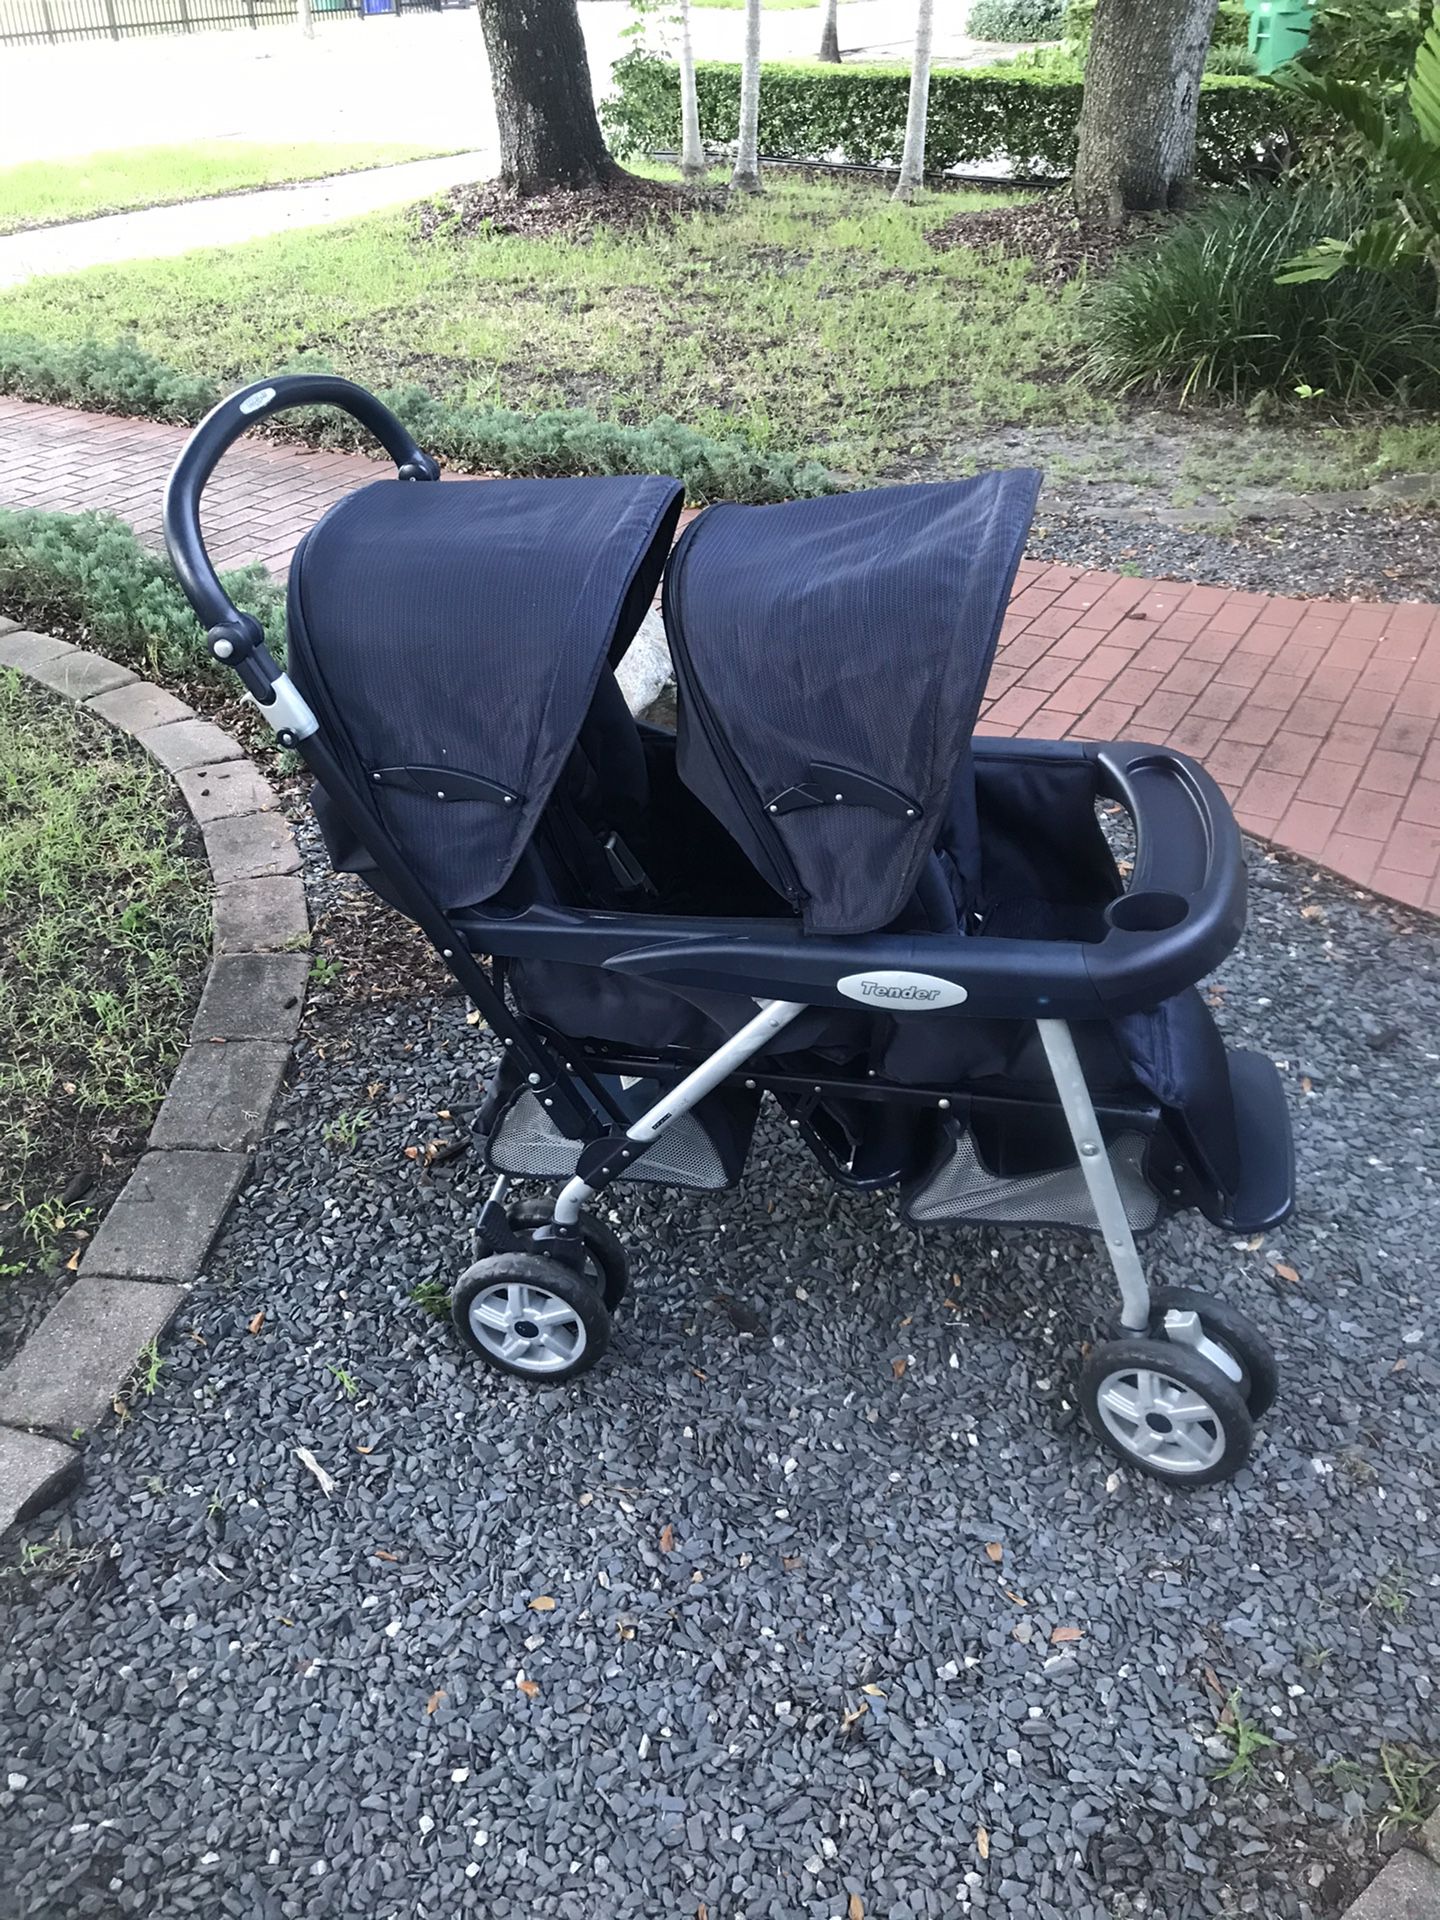 Peg Perego Baby Stroller Dual/2 seater